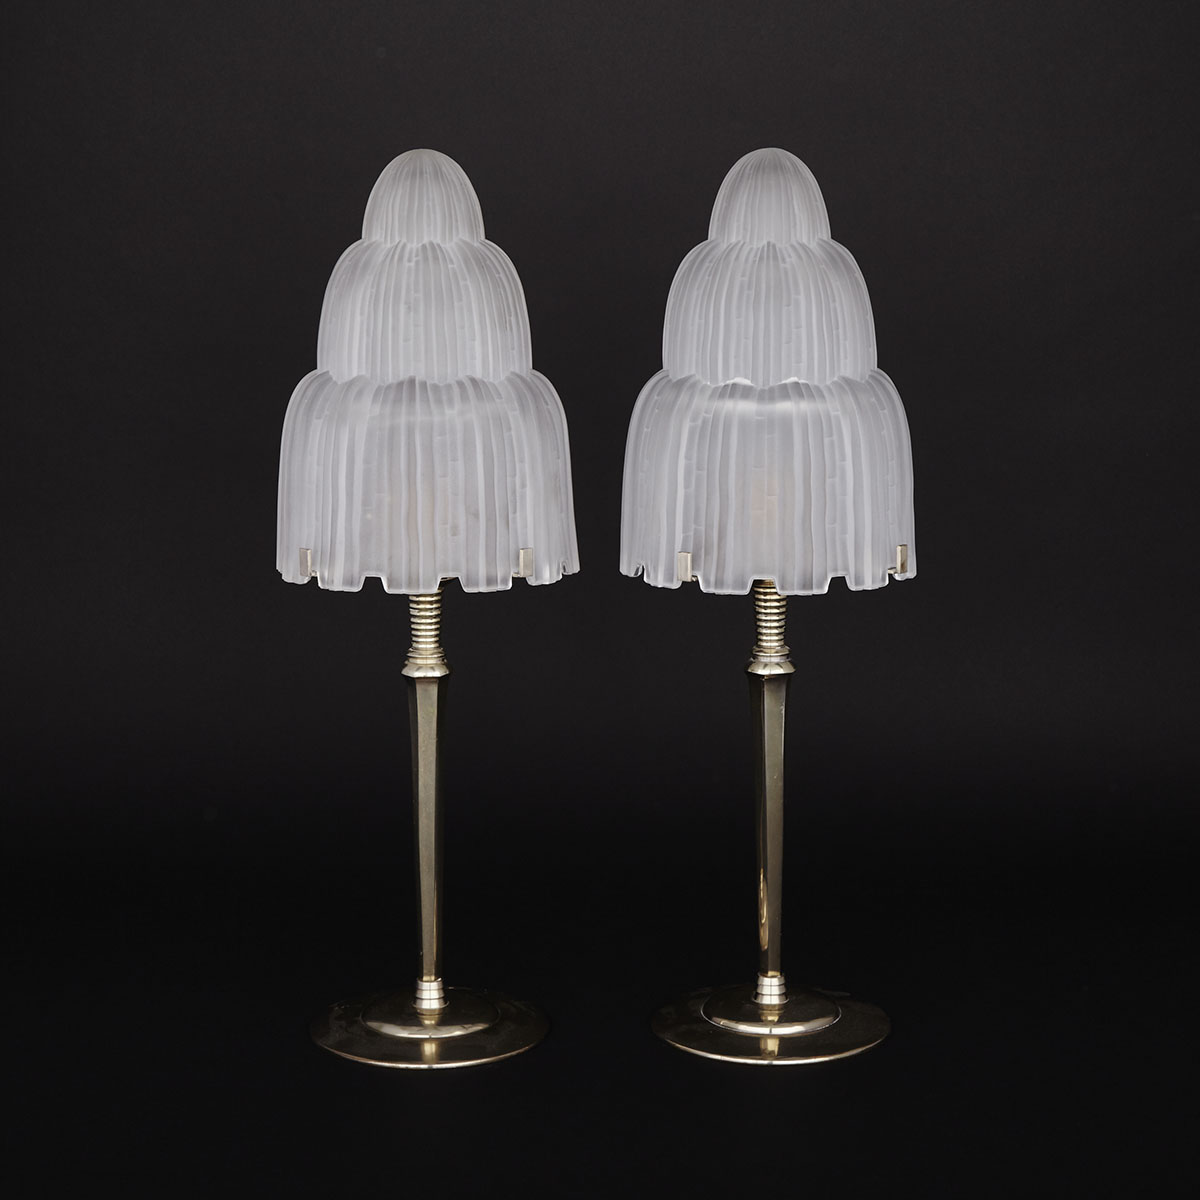 Pair of French Art Deco Table Lamps by Marius Ernest Sabino (1878-1961)